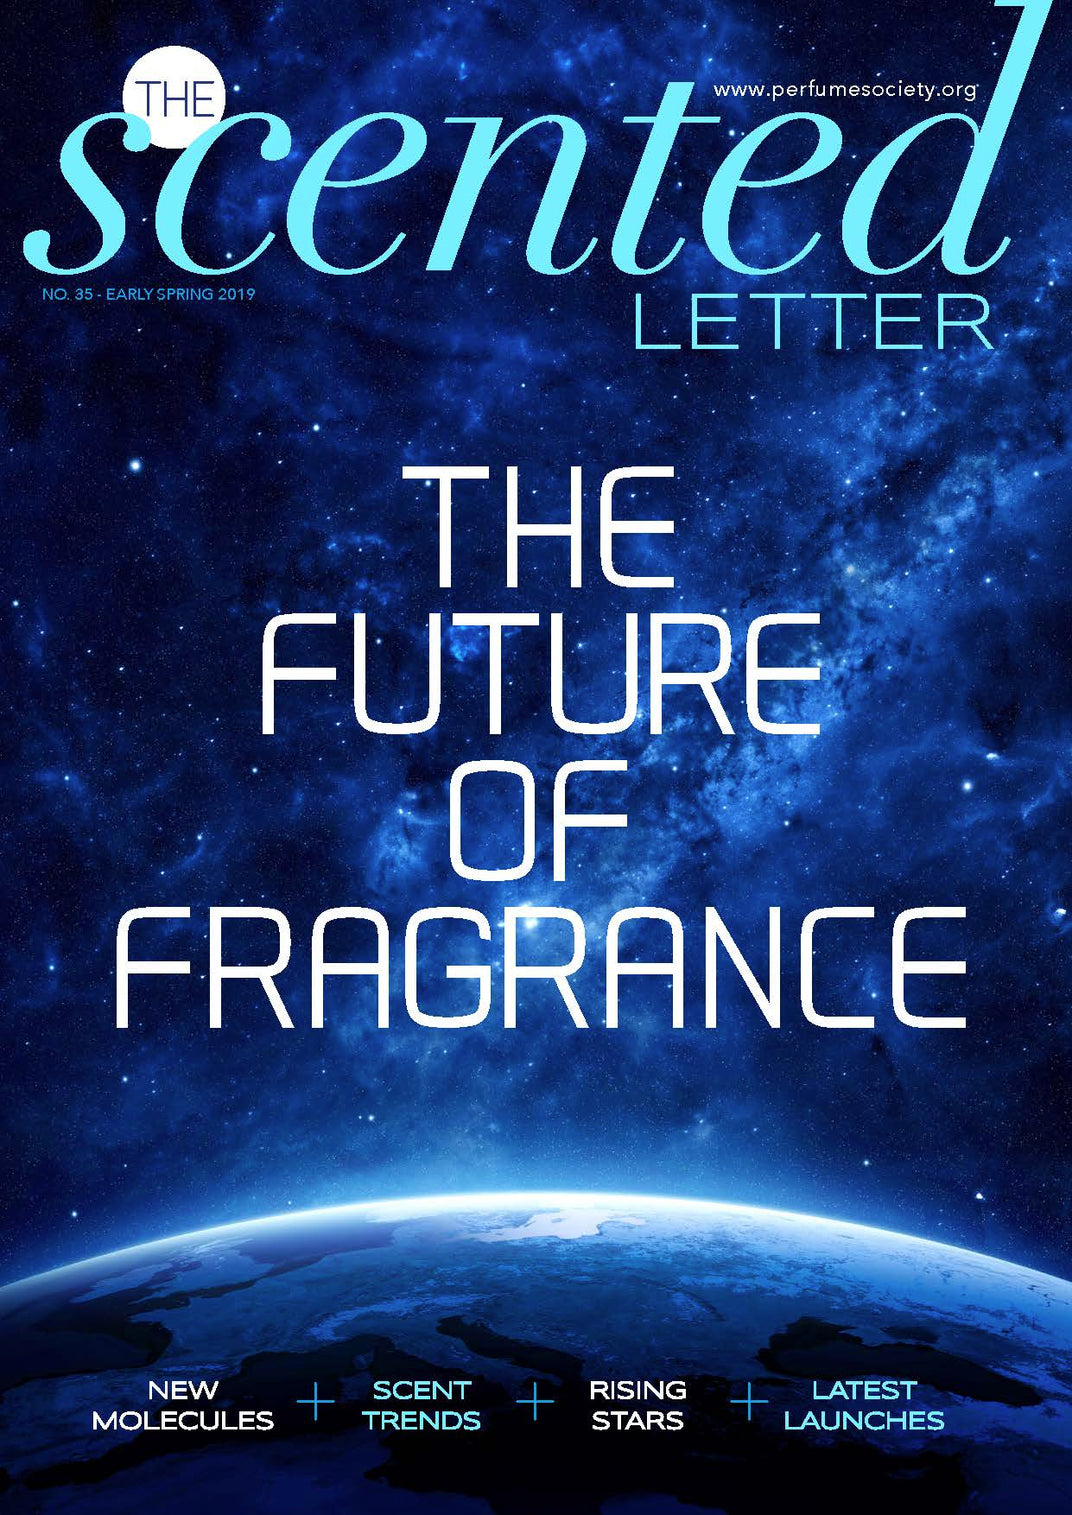 a-scented-letter-the-future-of-fragrance-whats-in-the-bottle-image